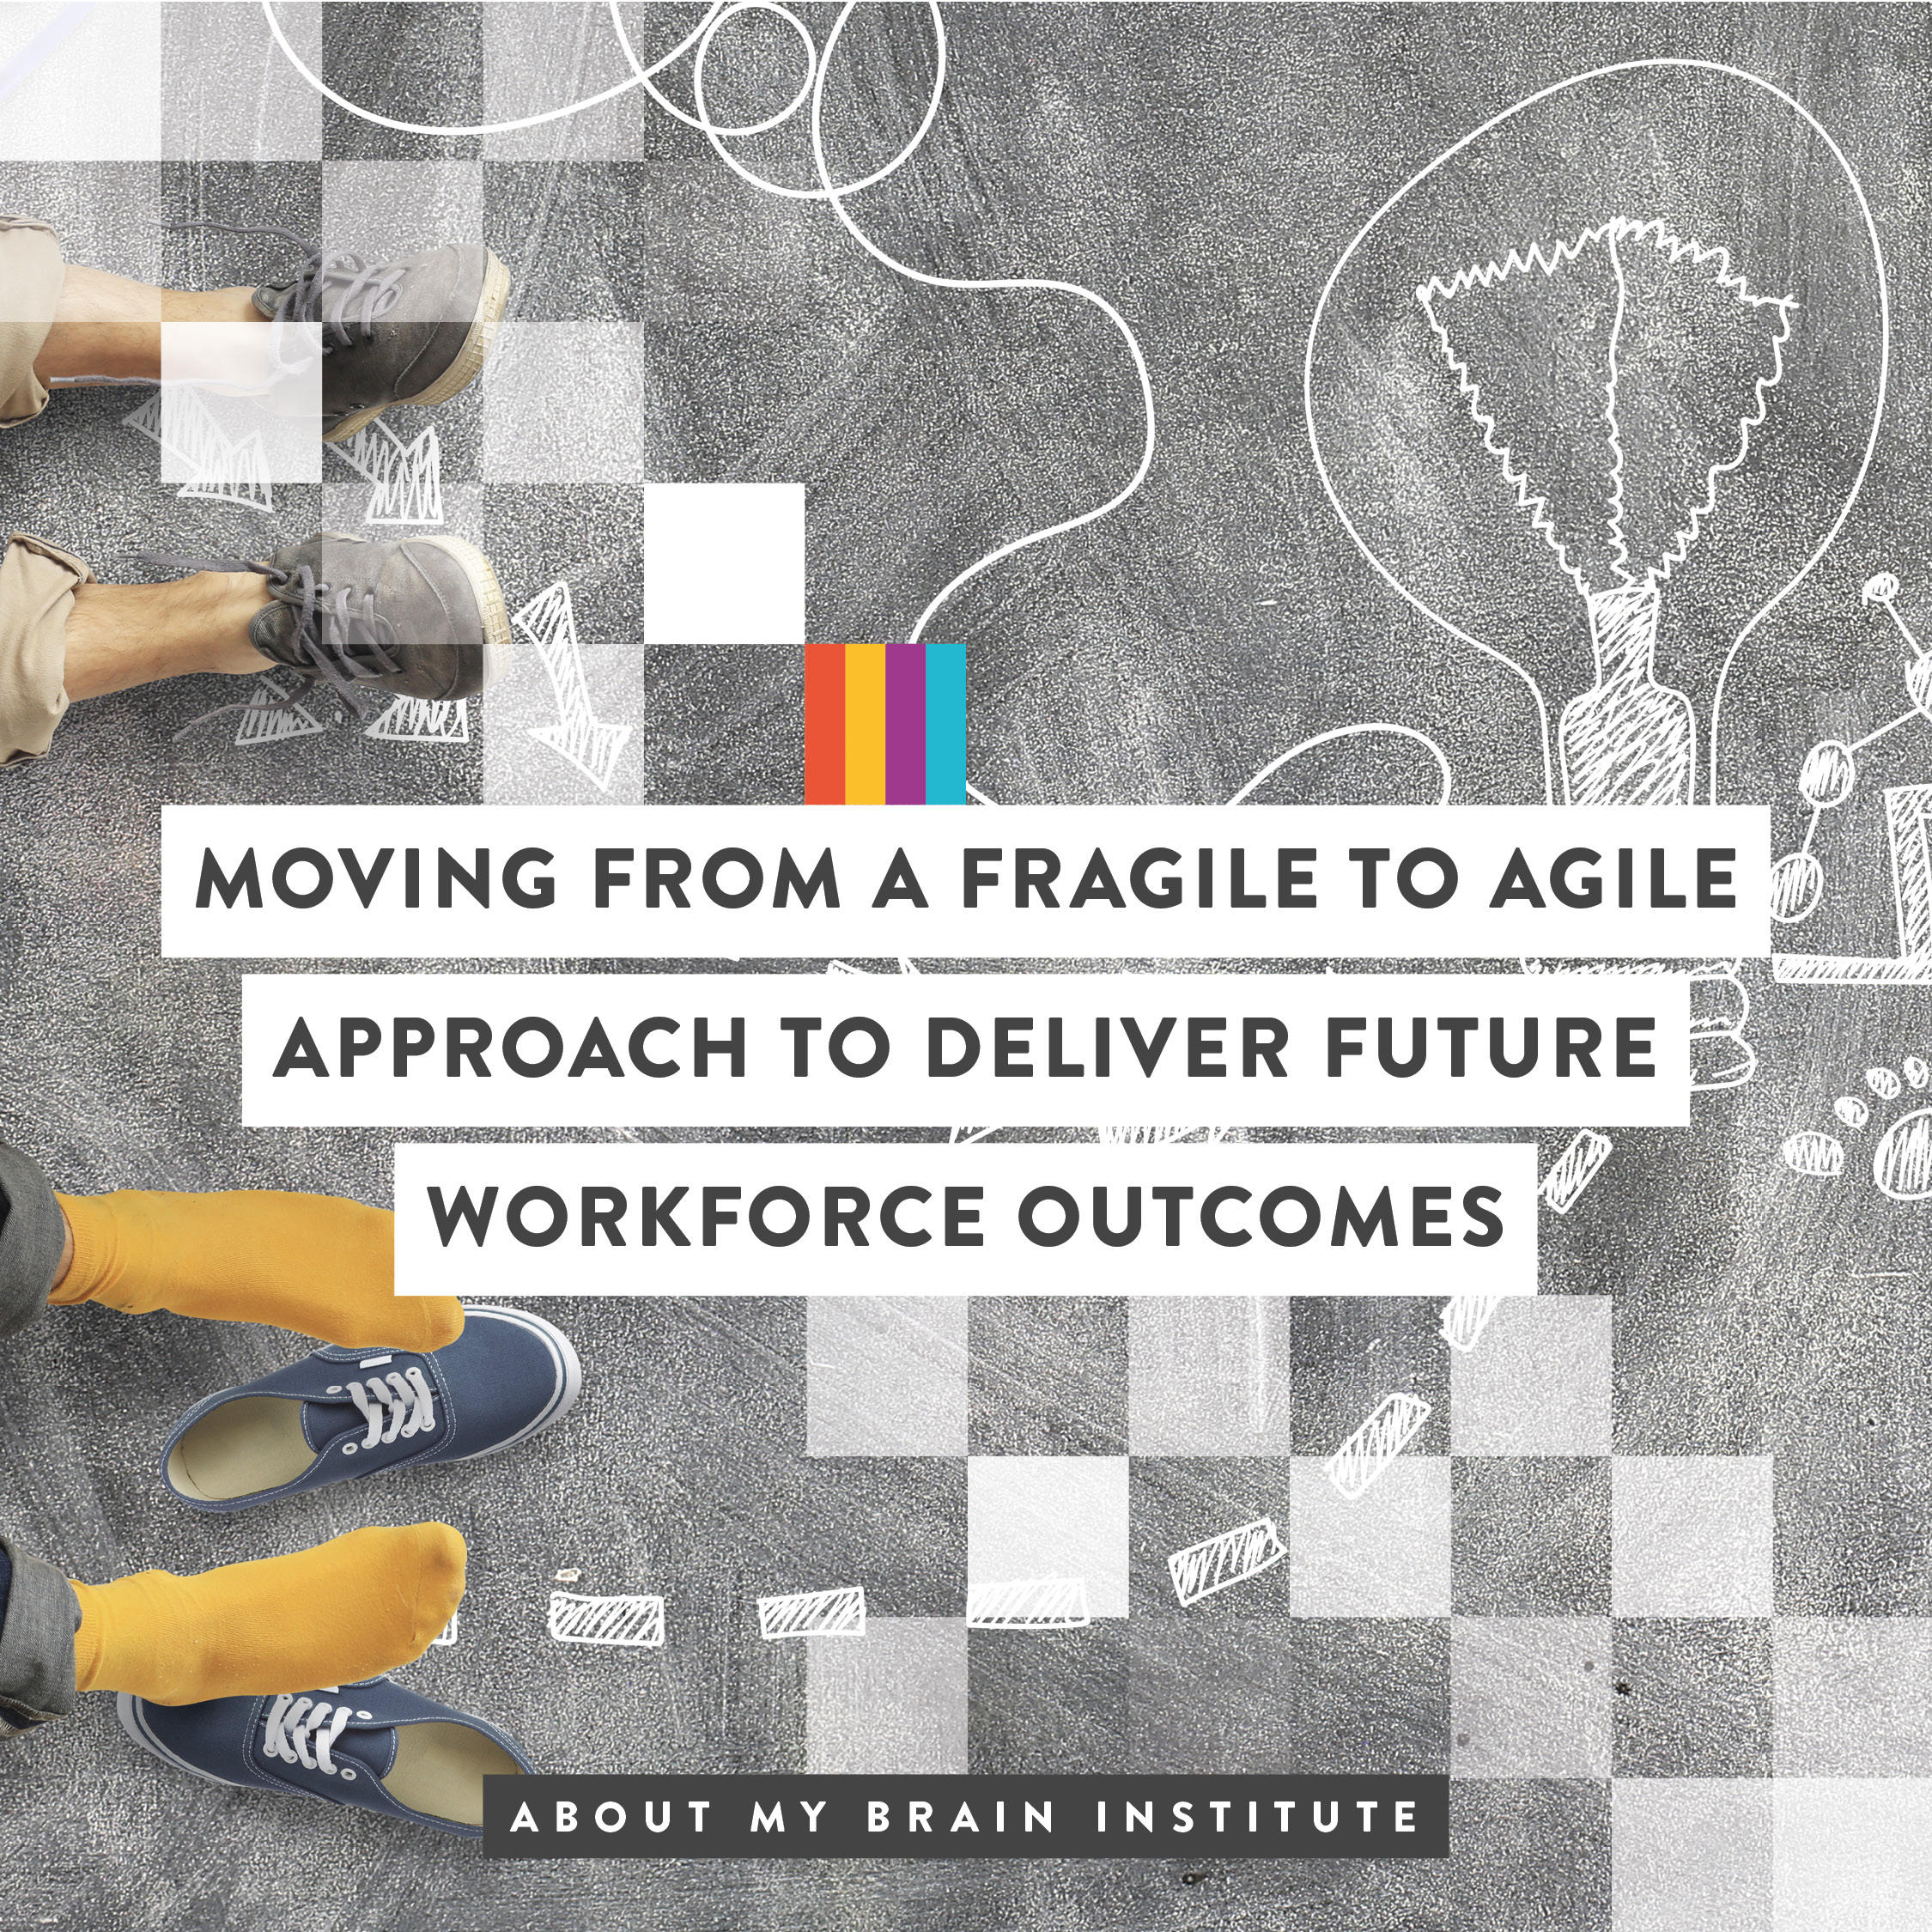 TP 1080 x 1080- Moving-From-A-Fragile-To-Agile-Approach-To-Deliver-Future-Workforce-Outcomes